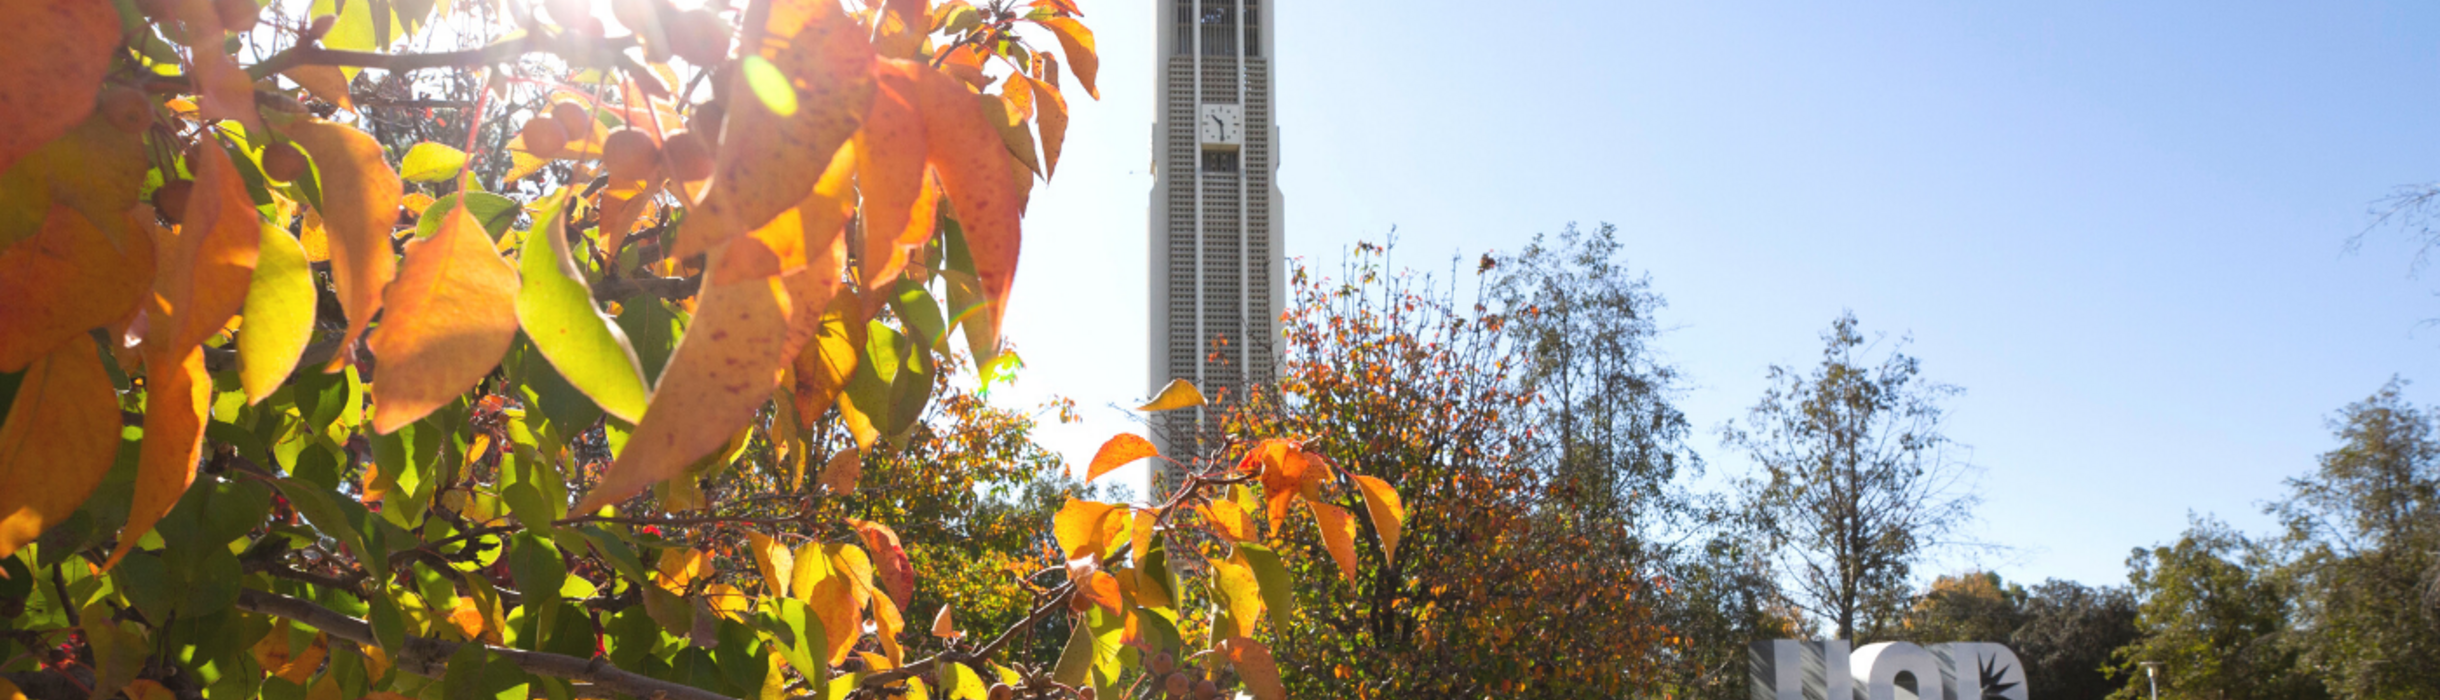 UCR bell tower with trees in foreground